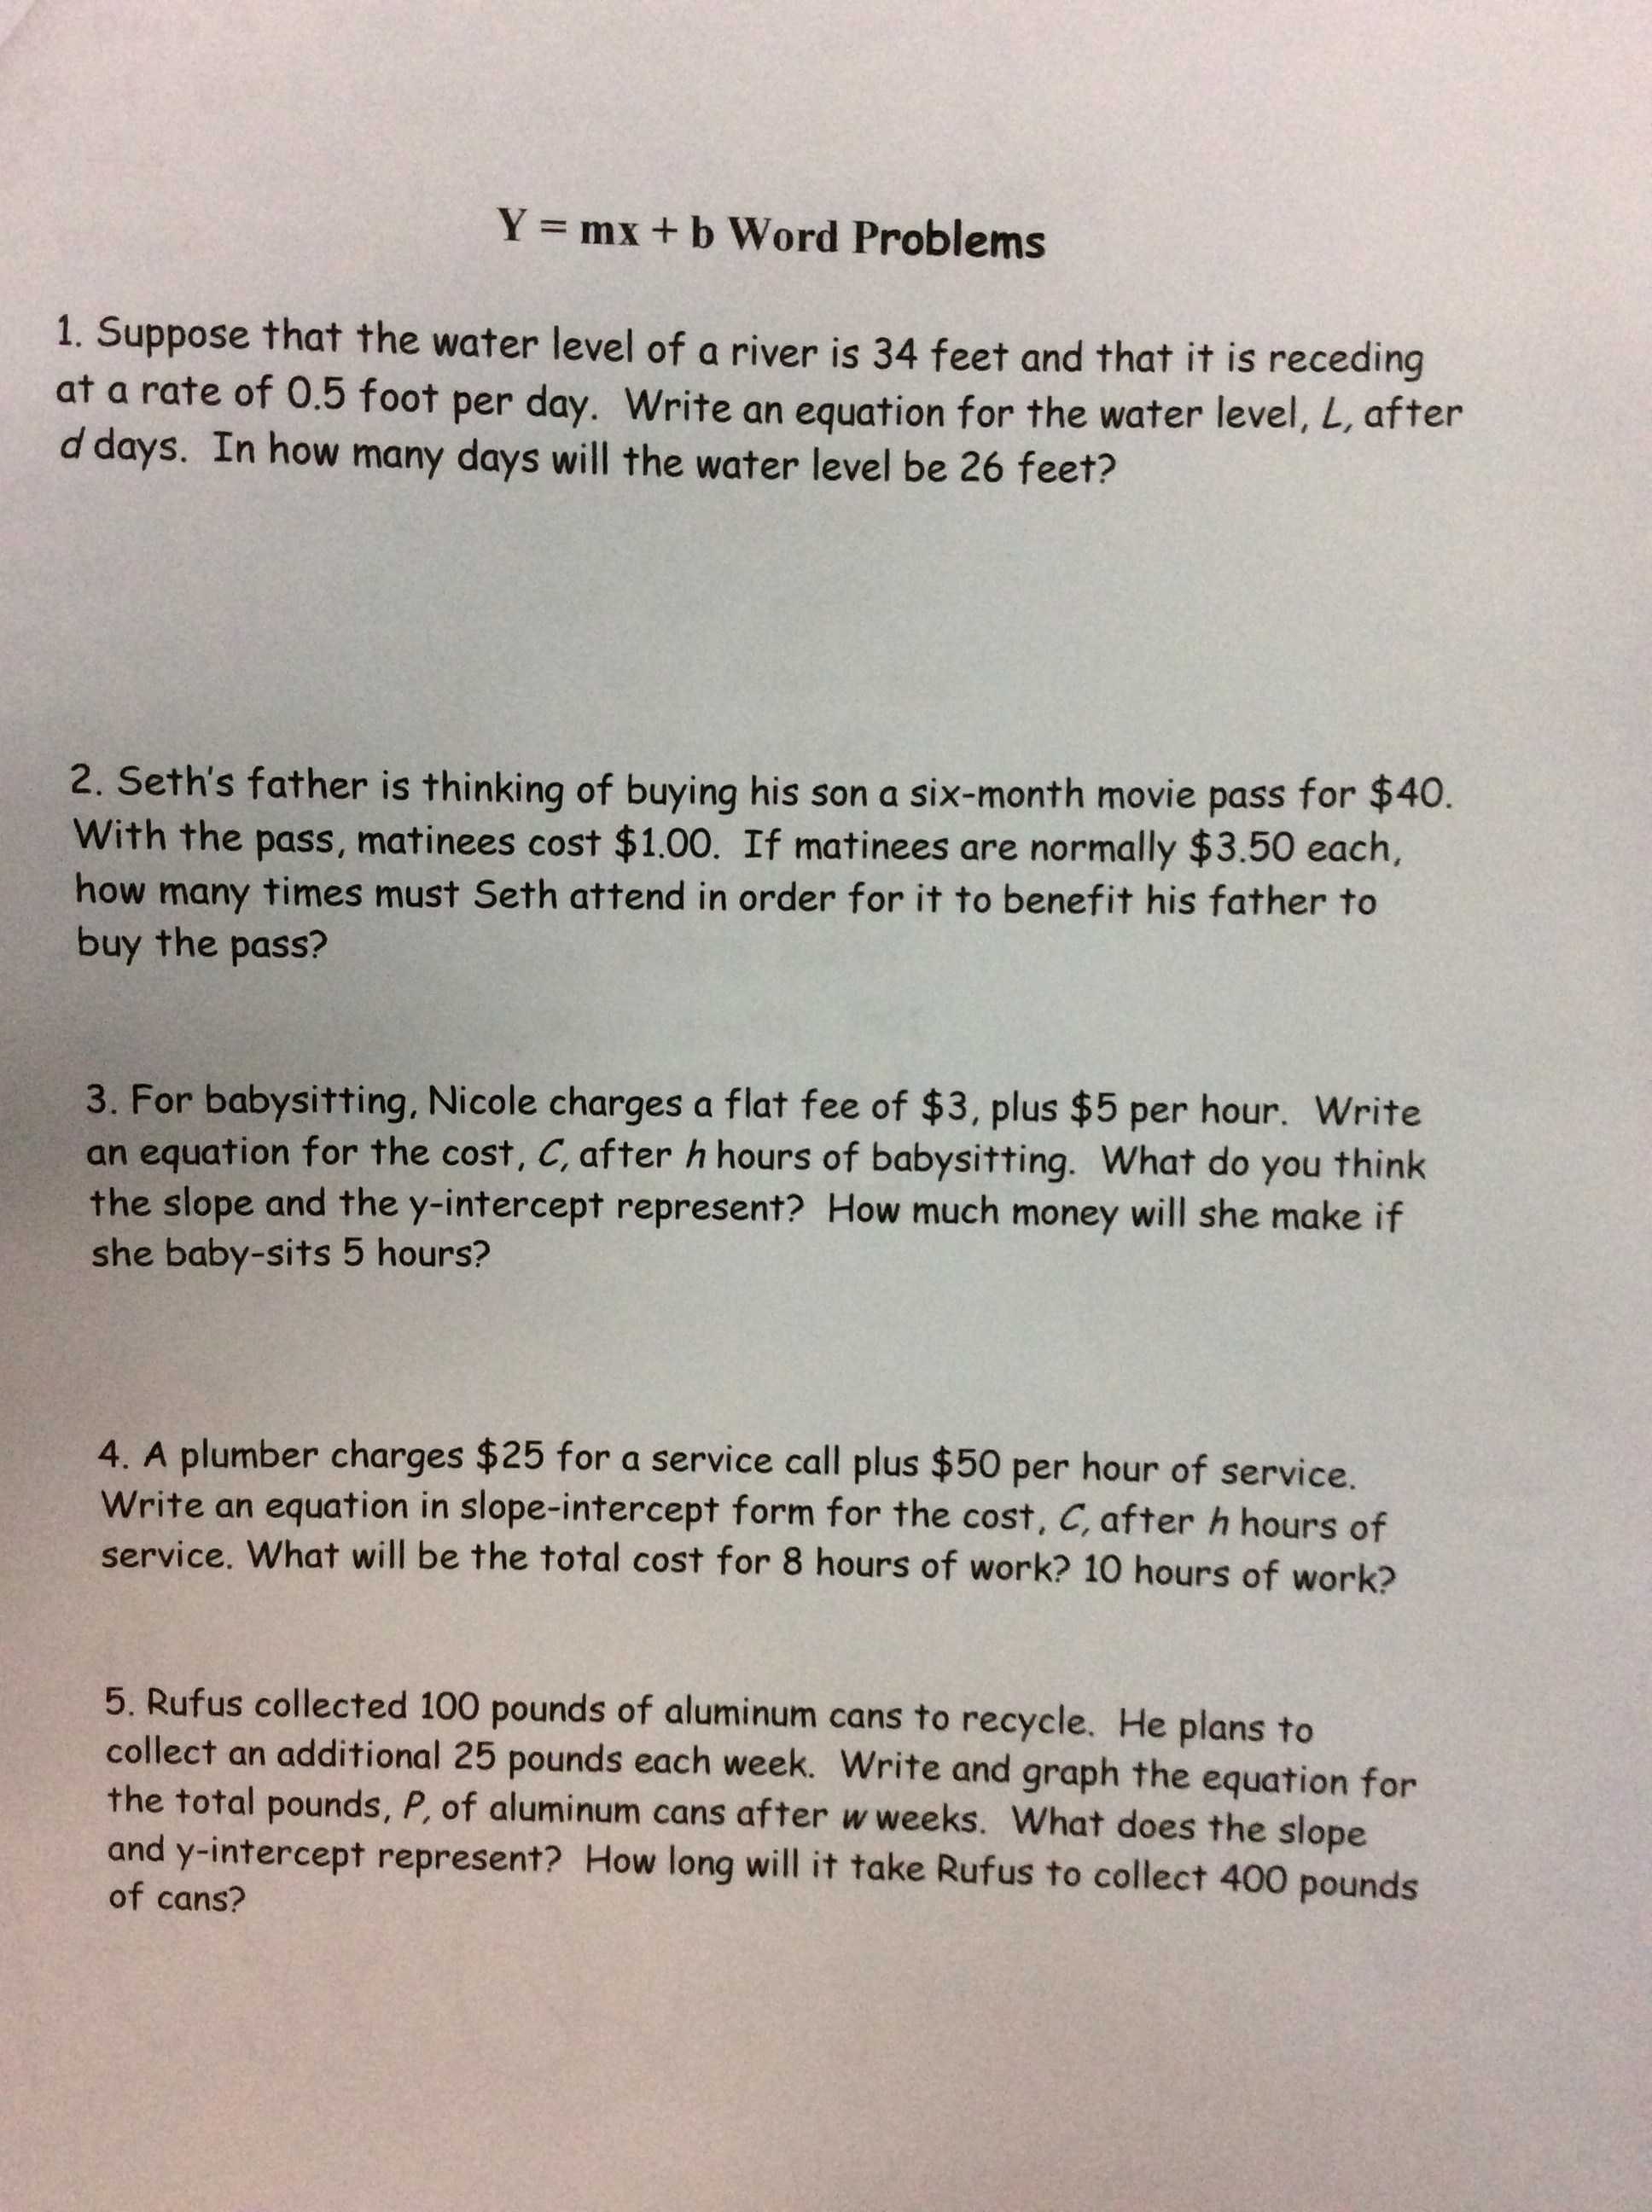 Simple and Compound Interest Worksheet Answers and Gorzycki Middle School